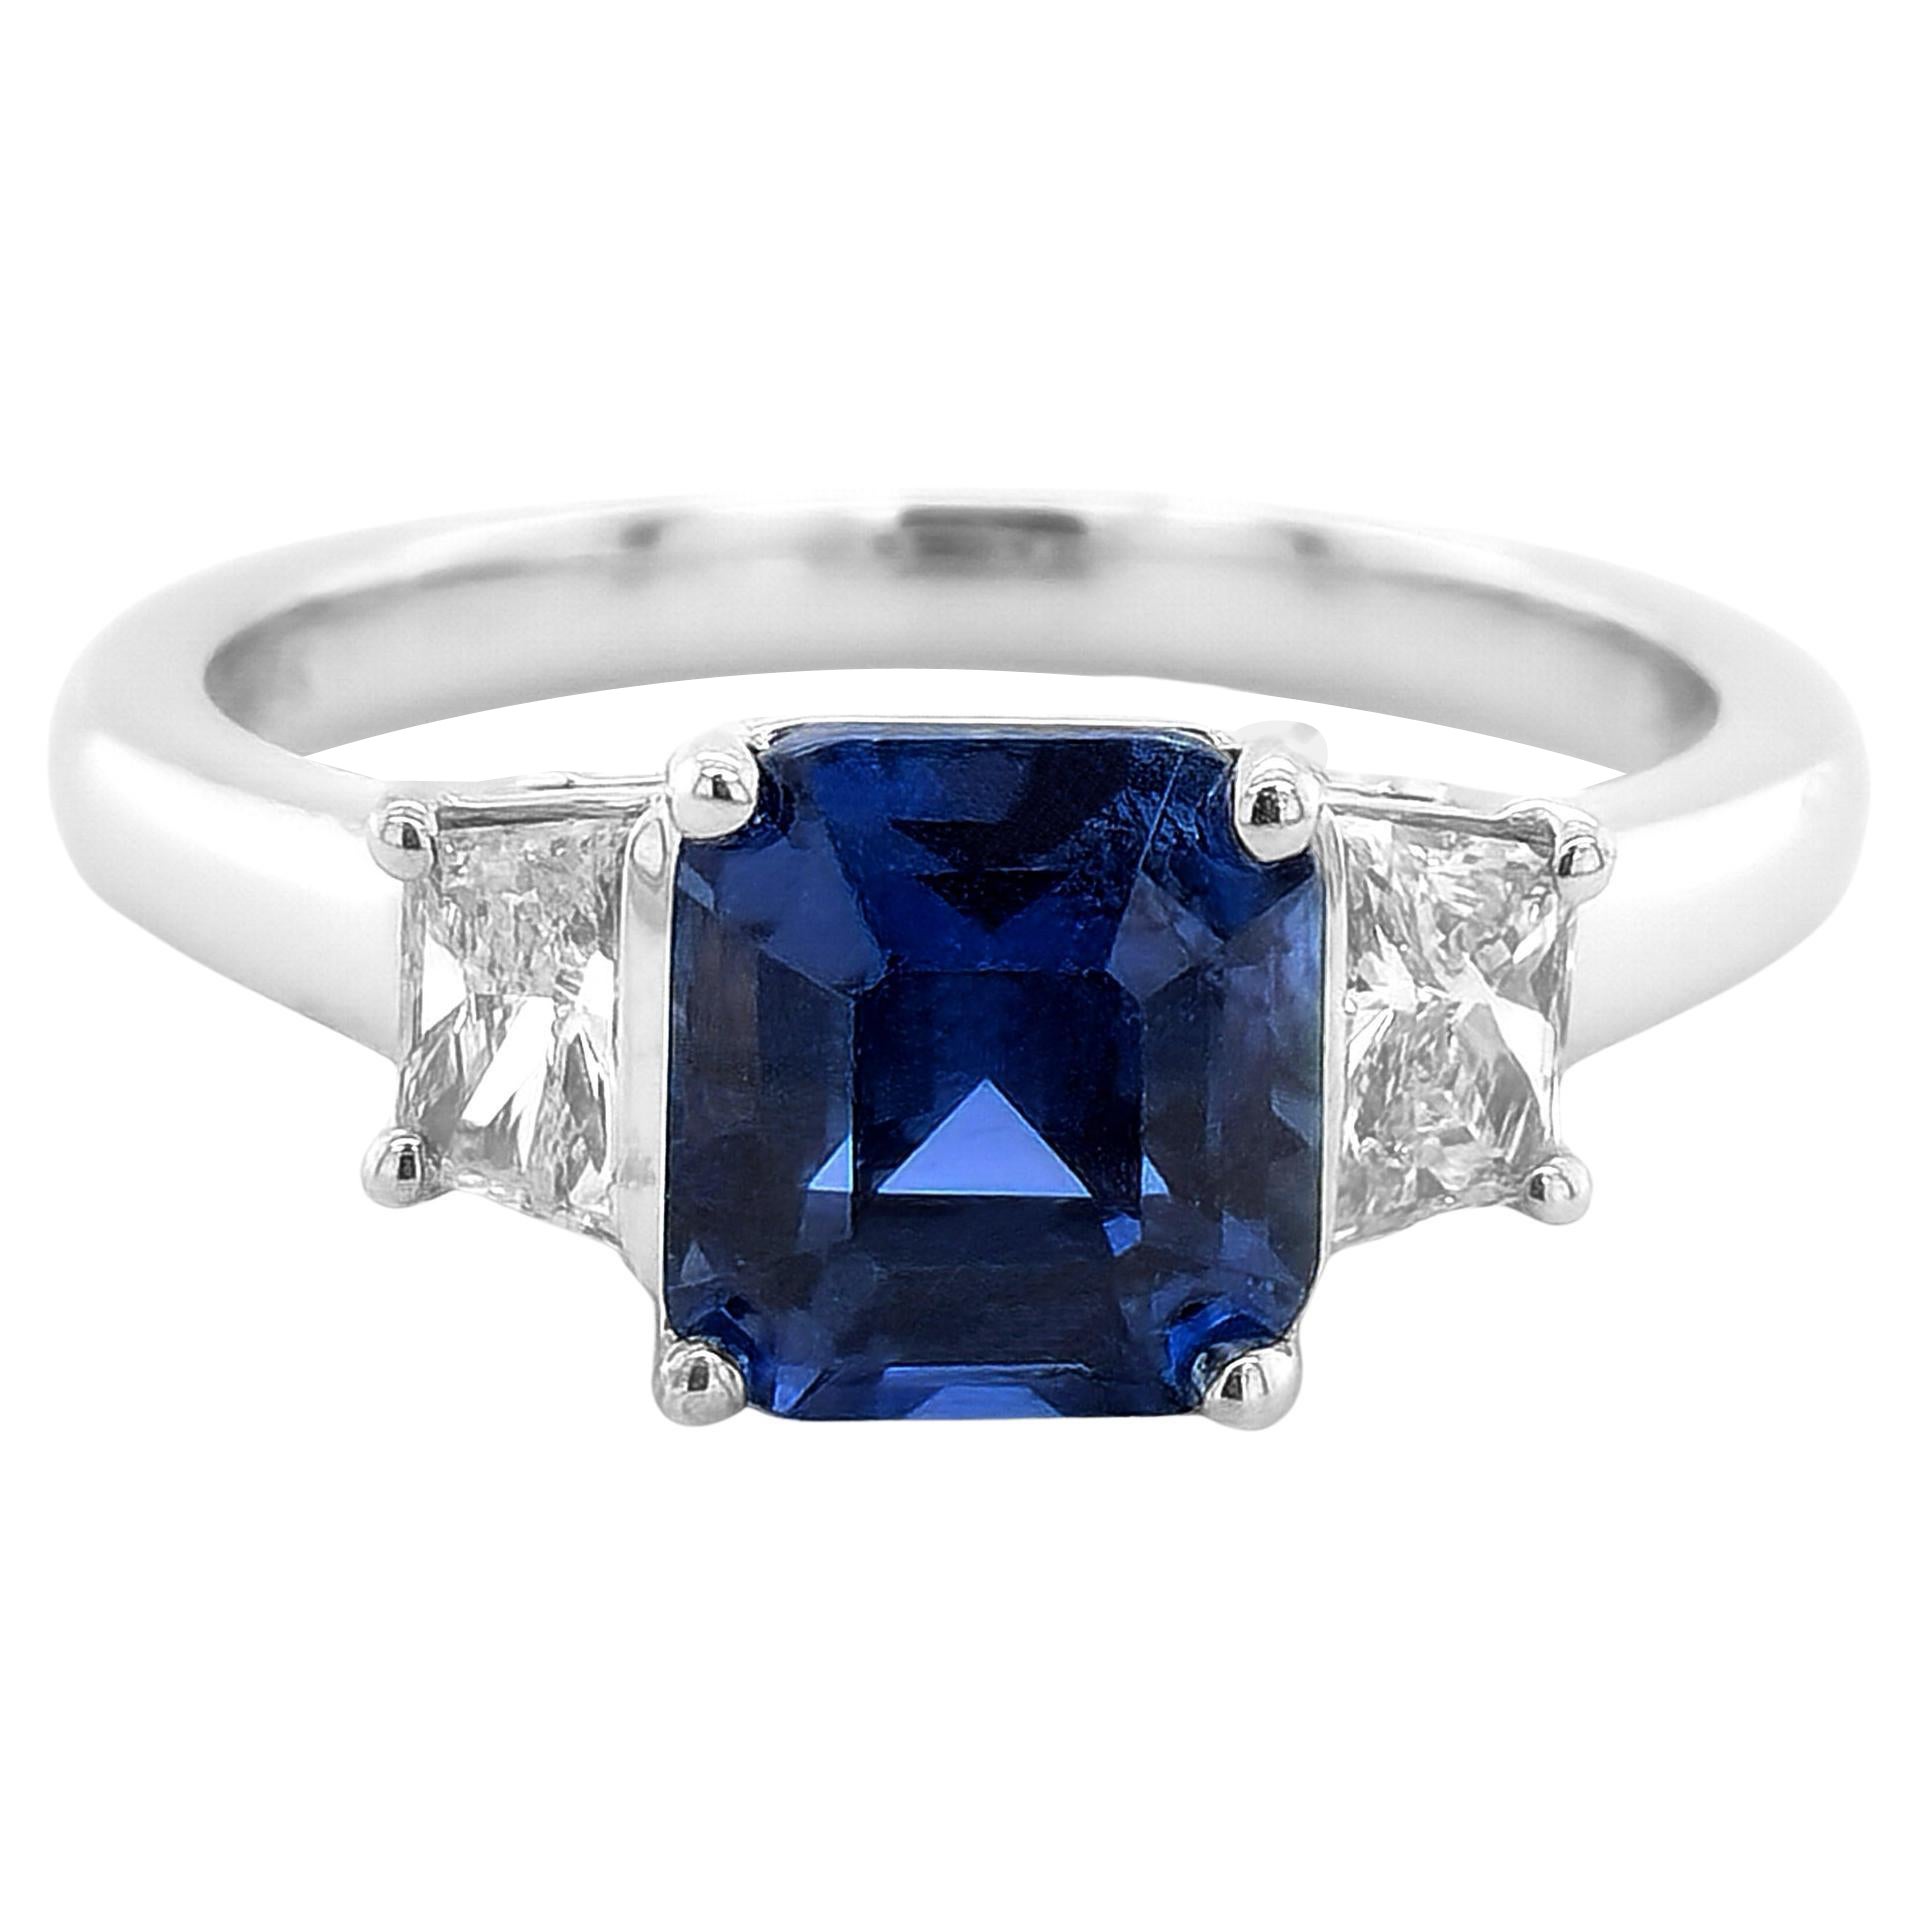 How can I identify a cobalt Spinel?